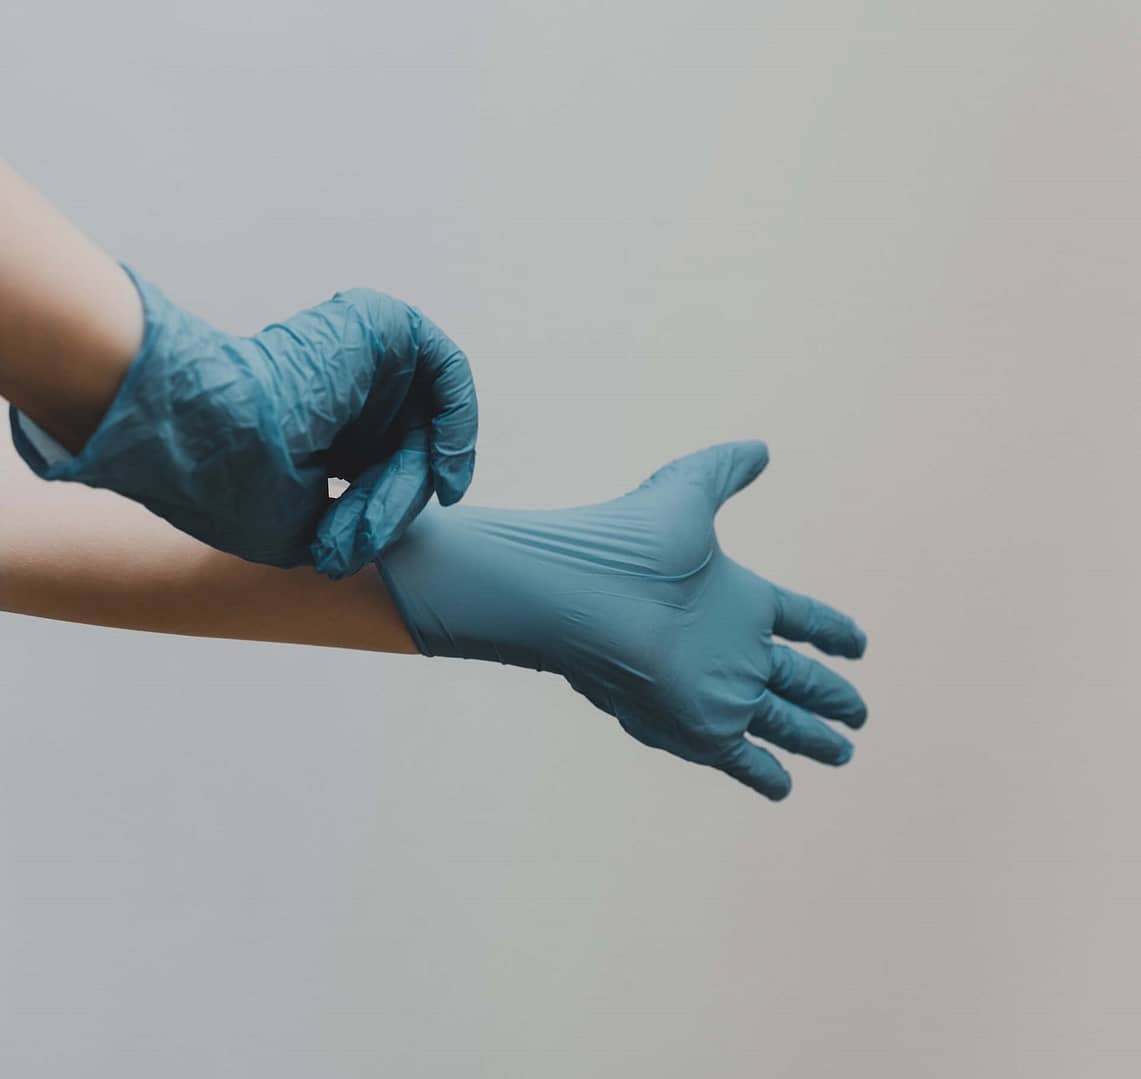 A doctor putting on rubber gloves